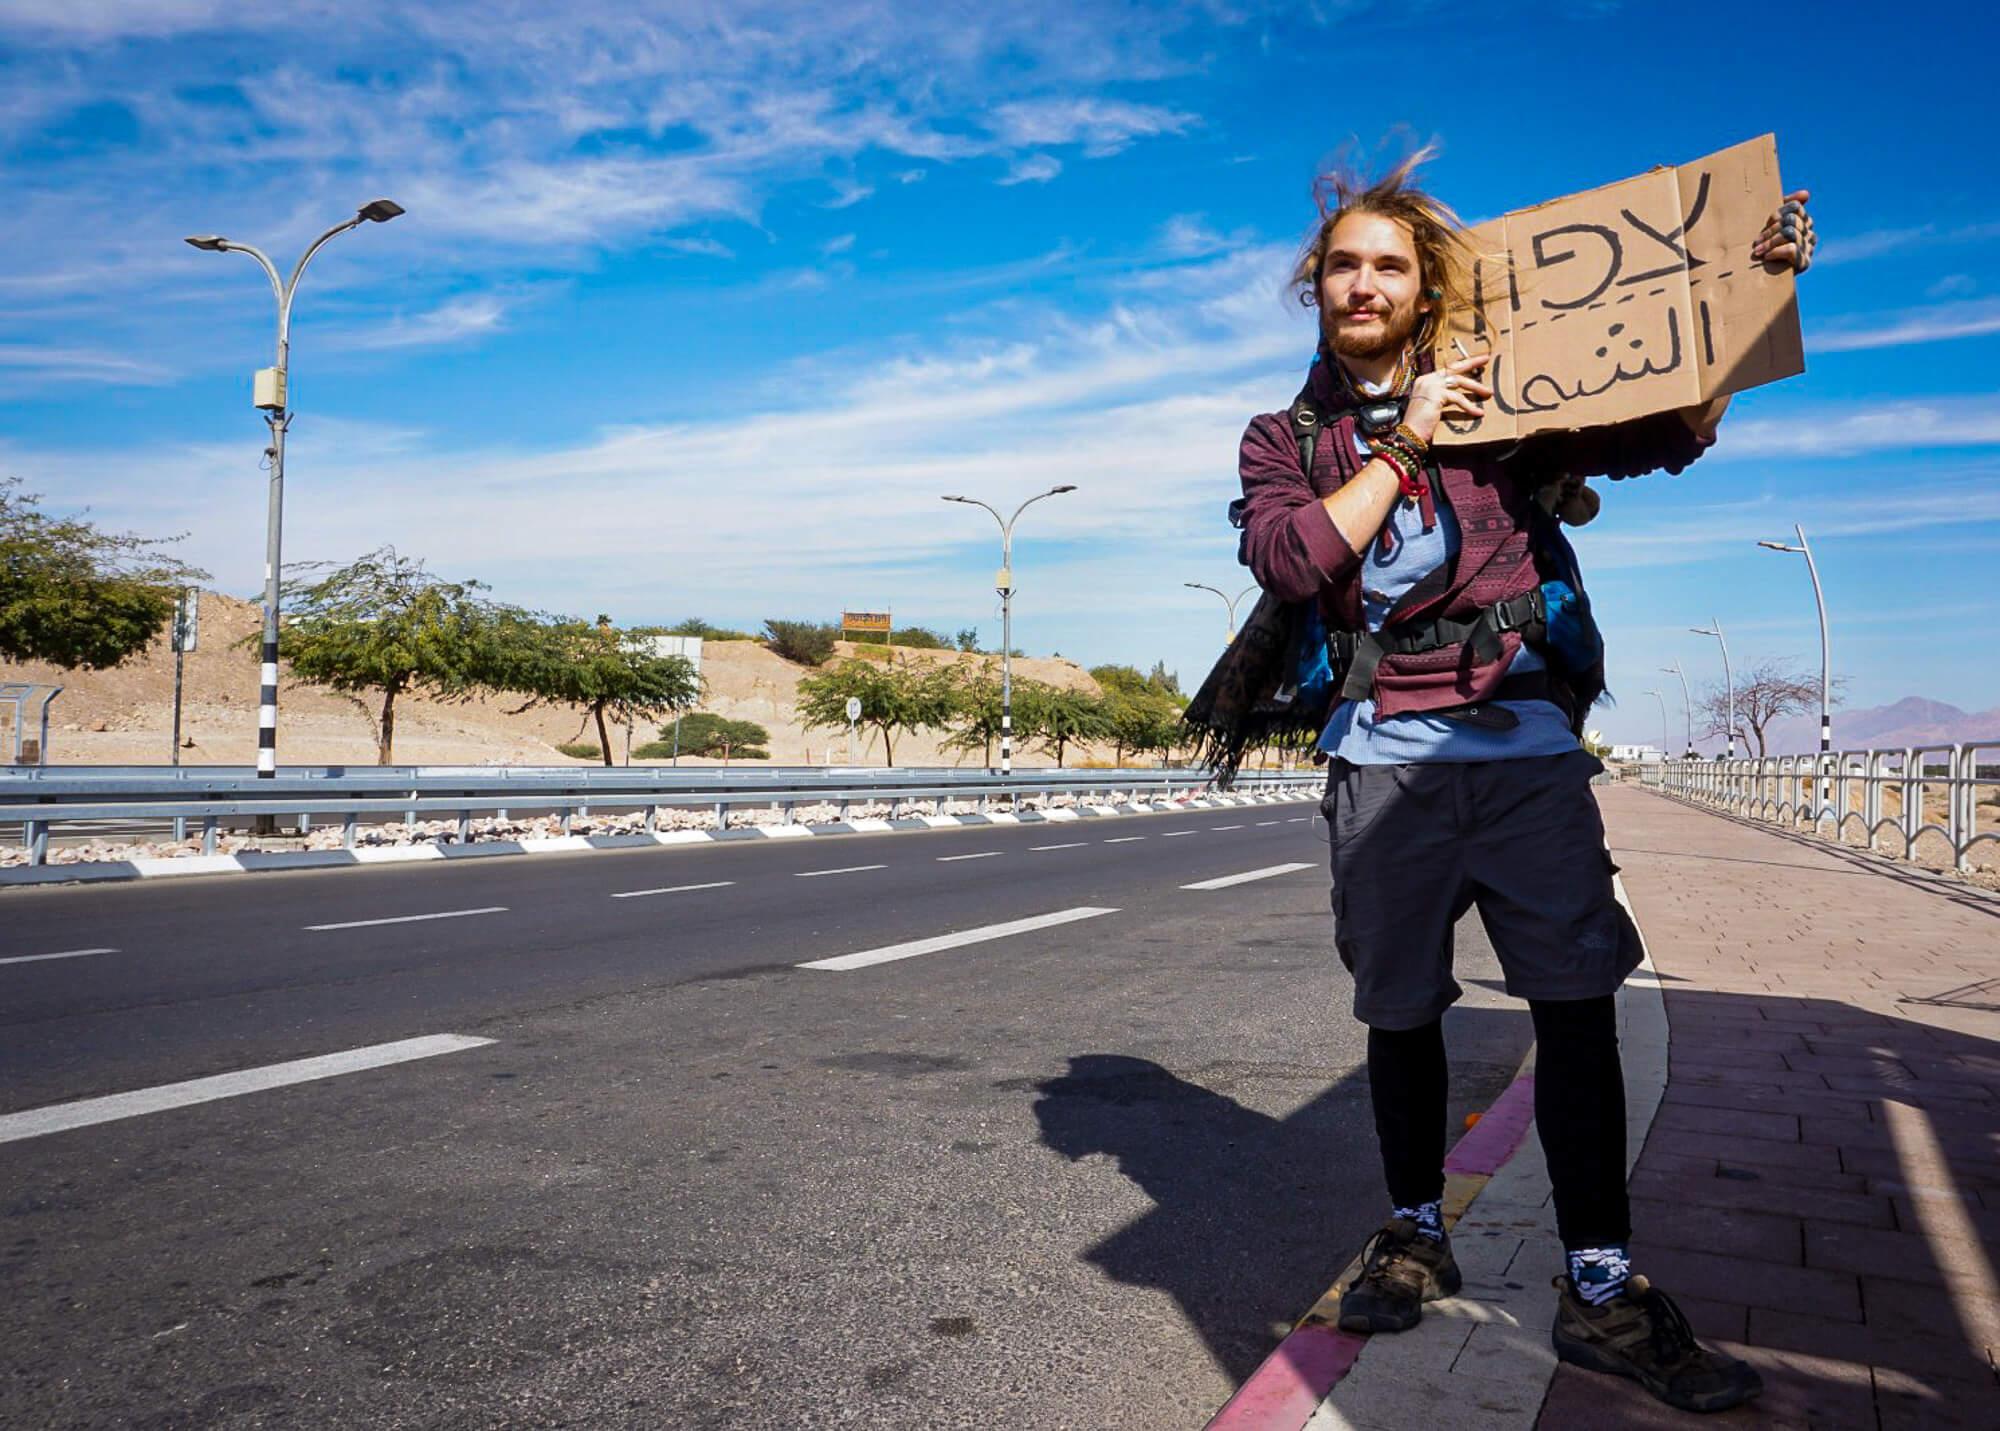 Best way to travel the world: hitchhiking